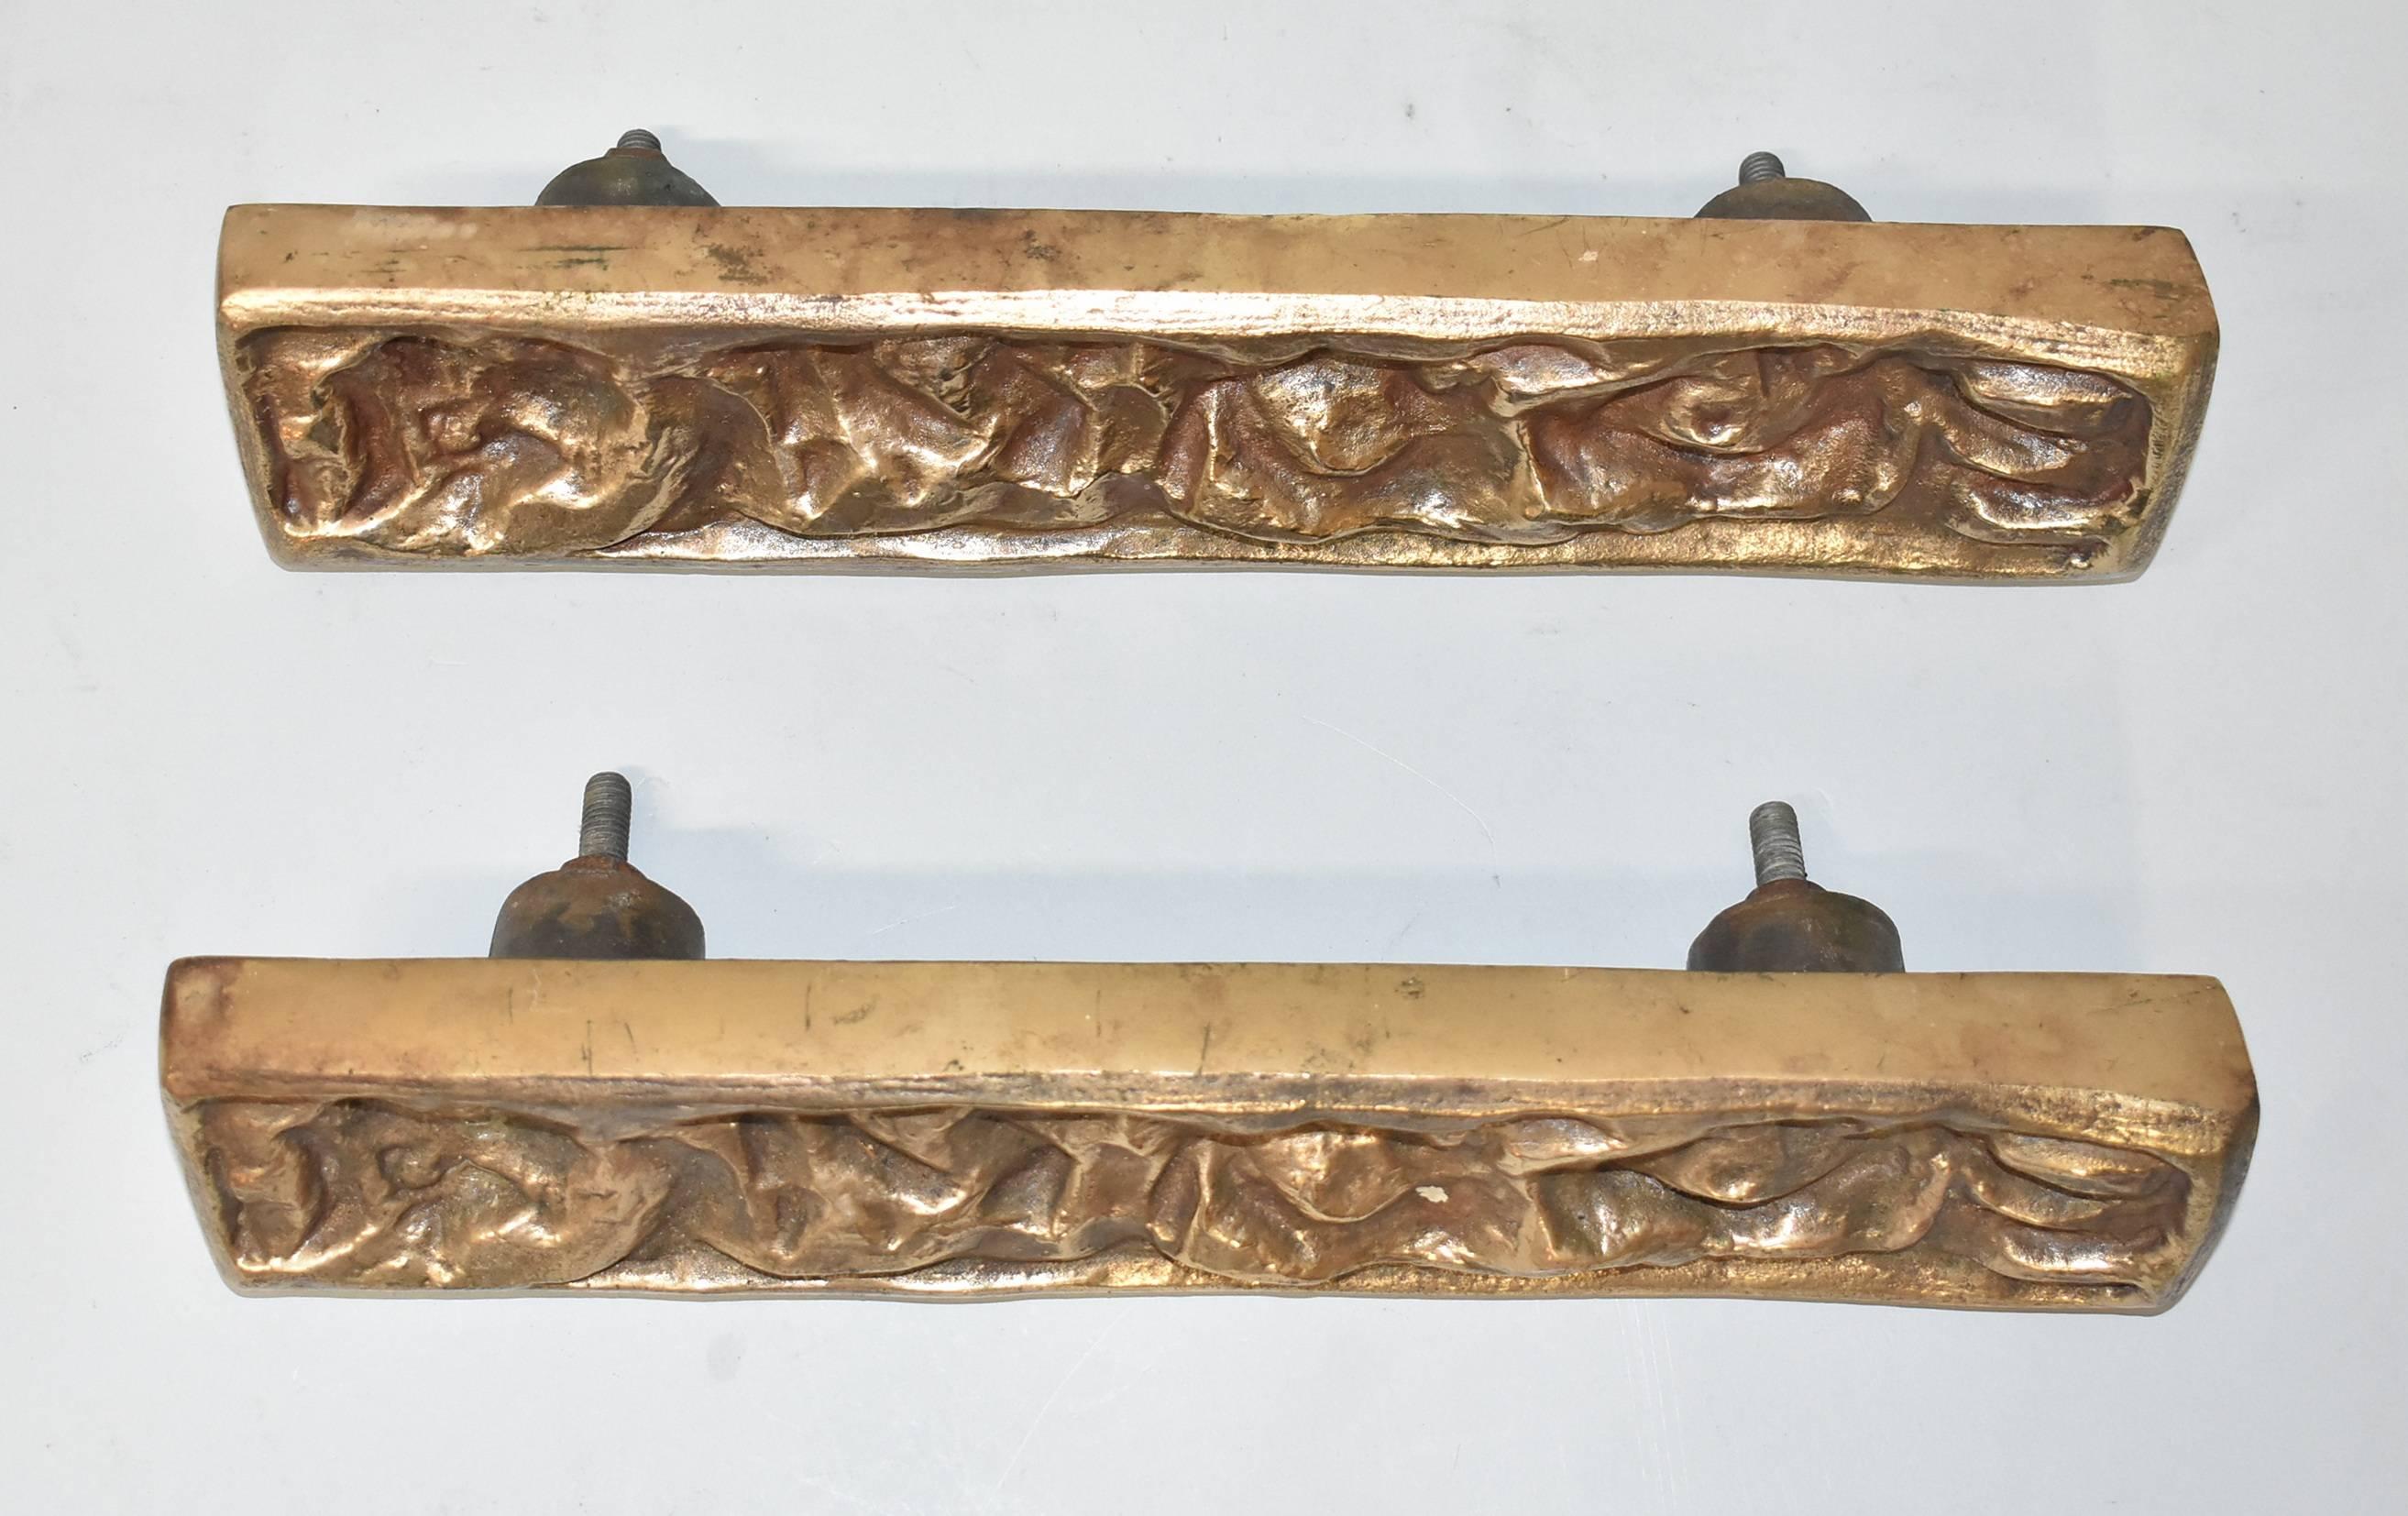 Heavy bronze brutalist deep relief pair door pulls attributed to architect Sherrill Broudy and sculpture Joy Verner. Stamped on the back H9.